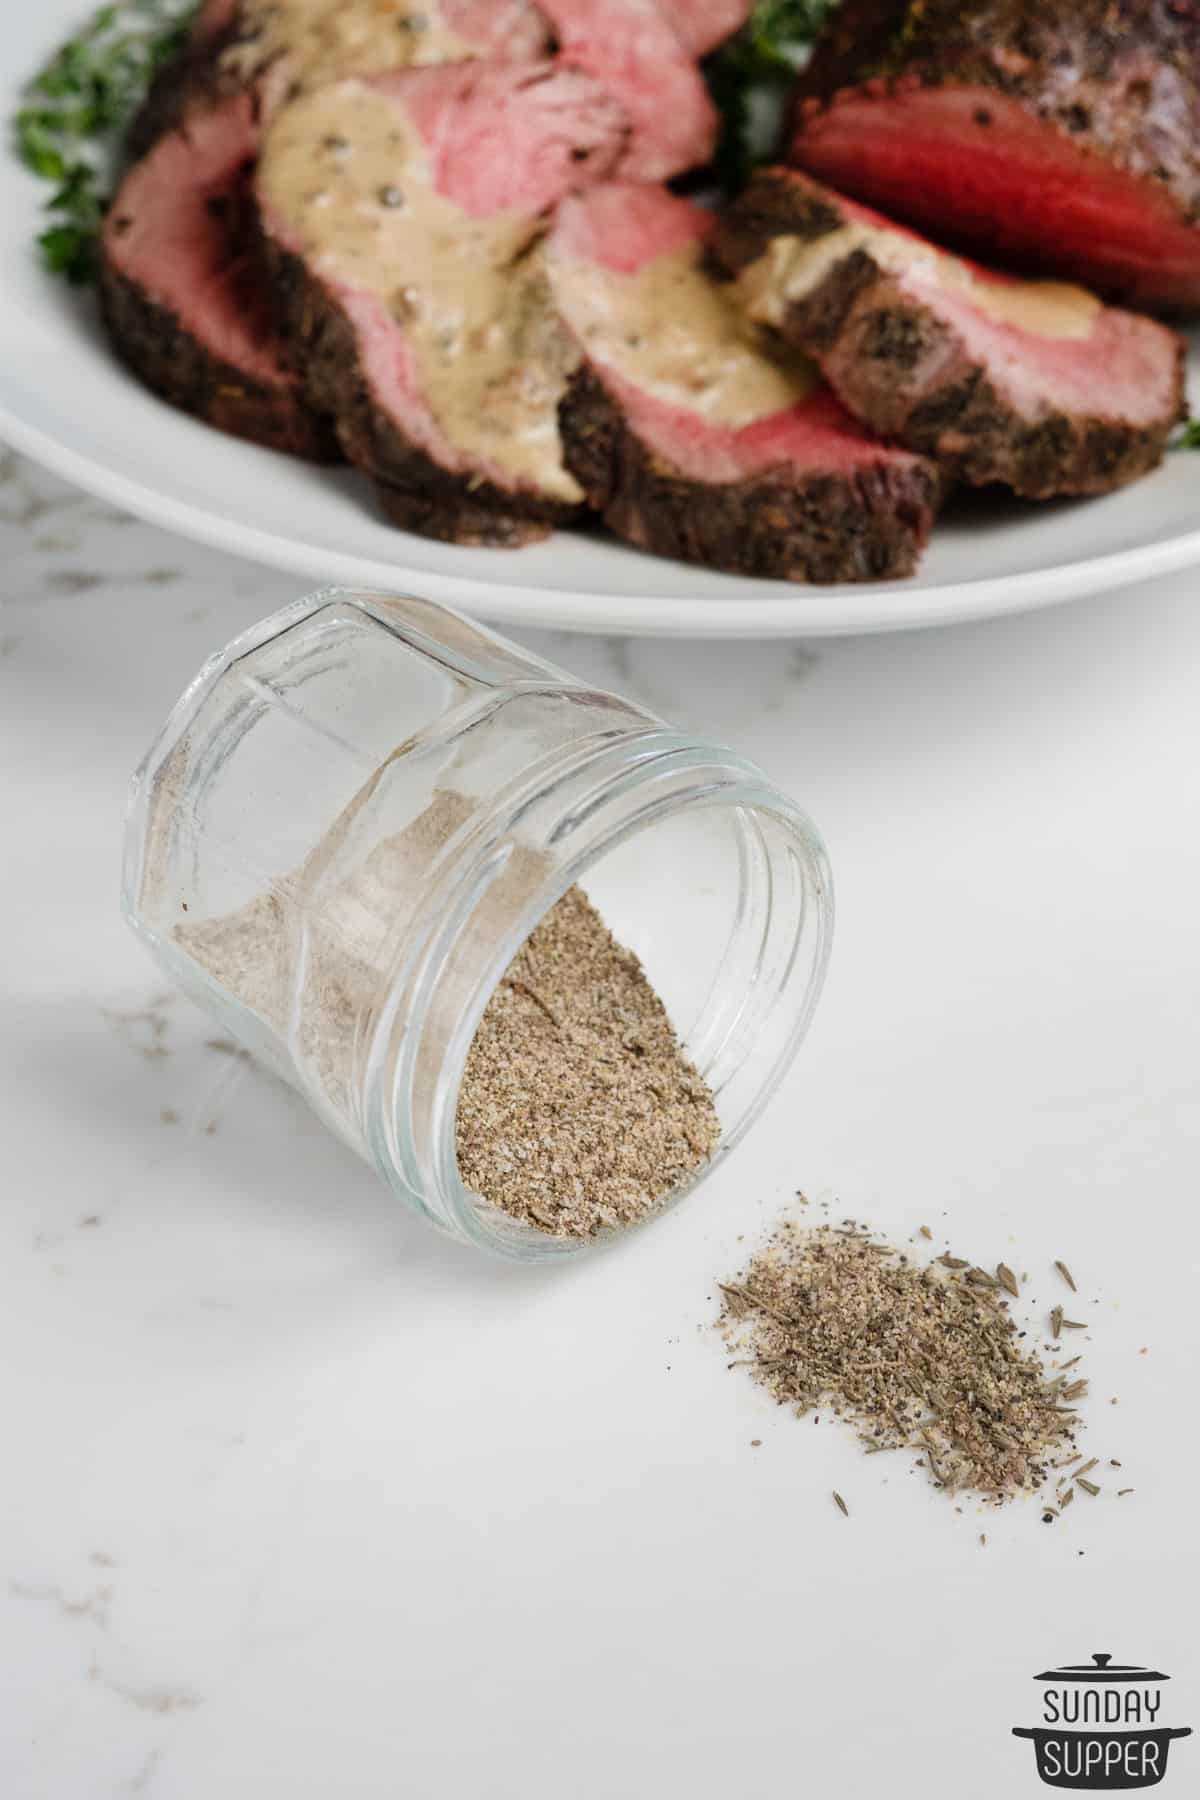 beef tenderloin rub spilling out of a glass jar next to cooked beef tenderloin on a plate